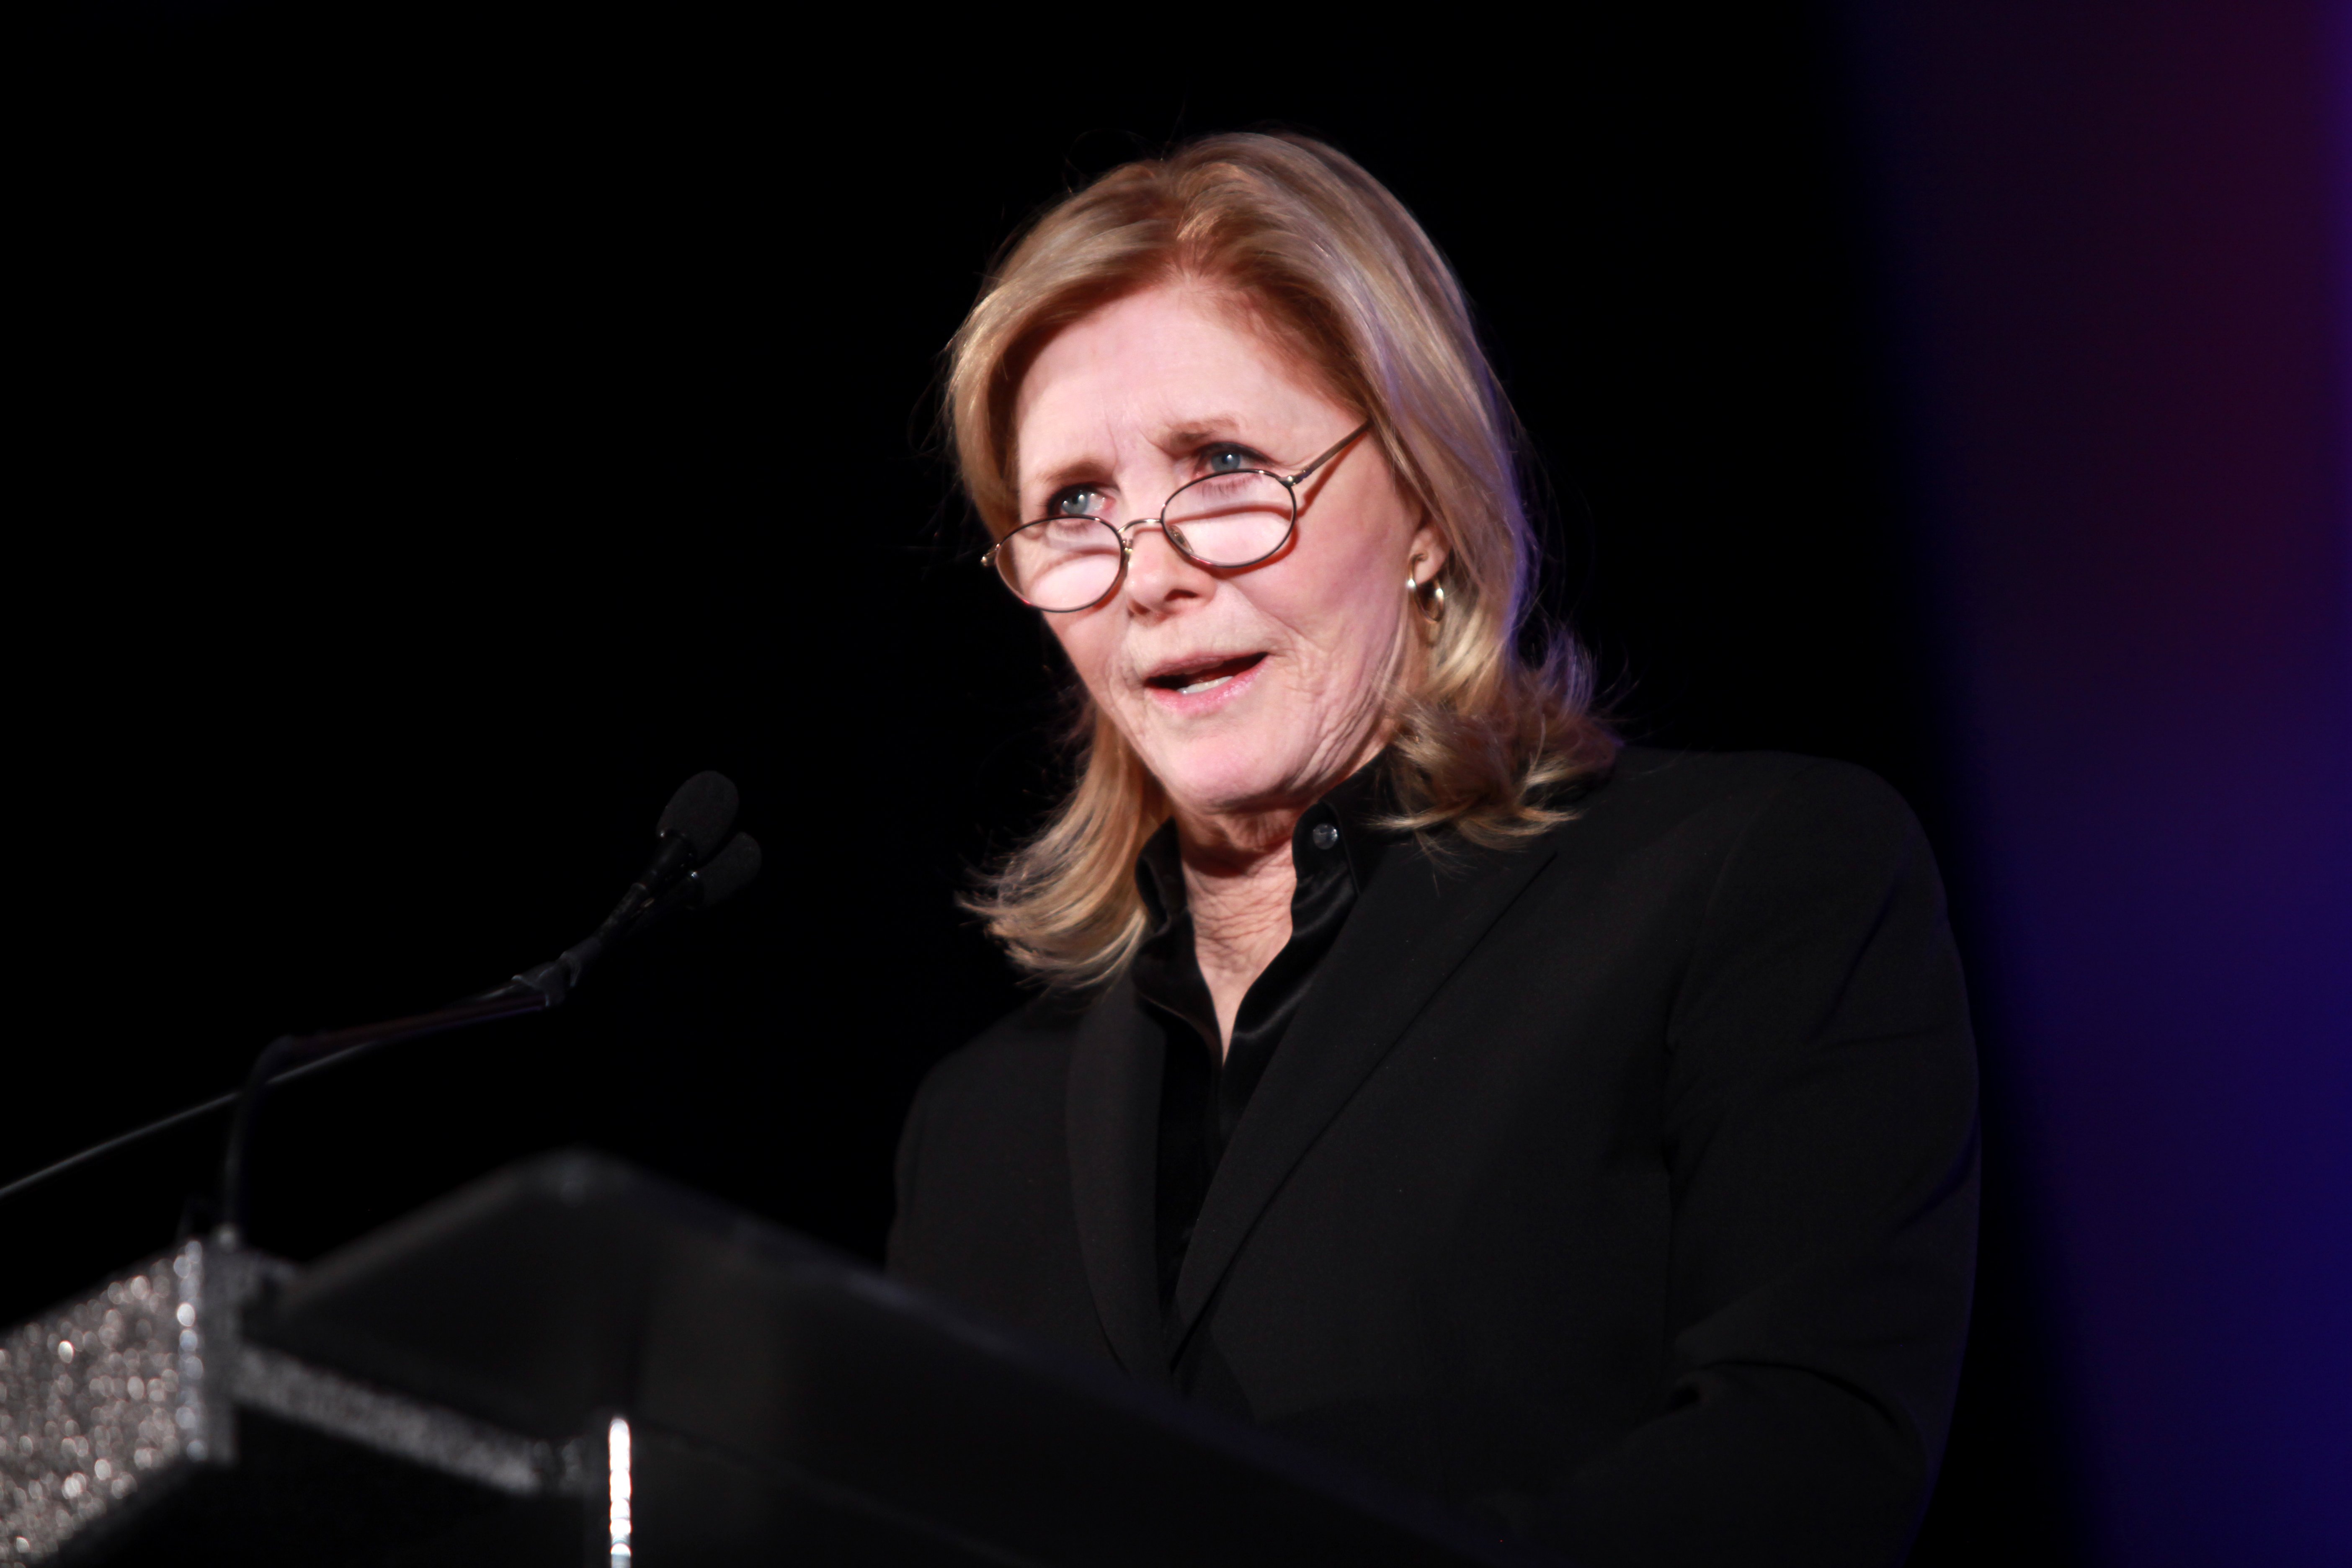 Susan Howard at the 2014 Western Conservative Conference. | Photo: Wikimedia Commons